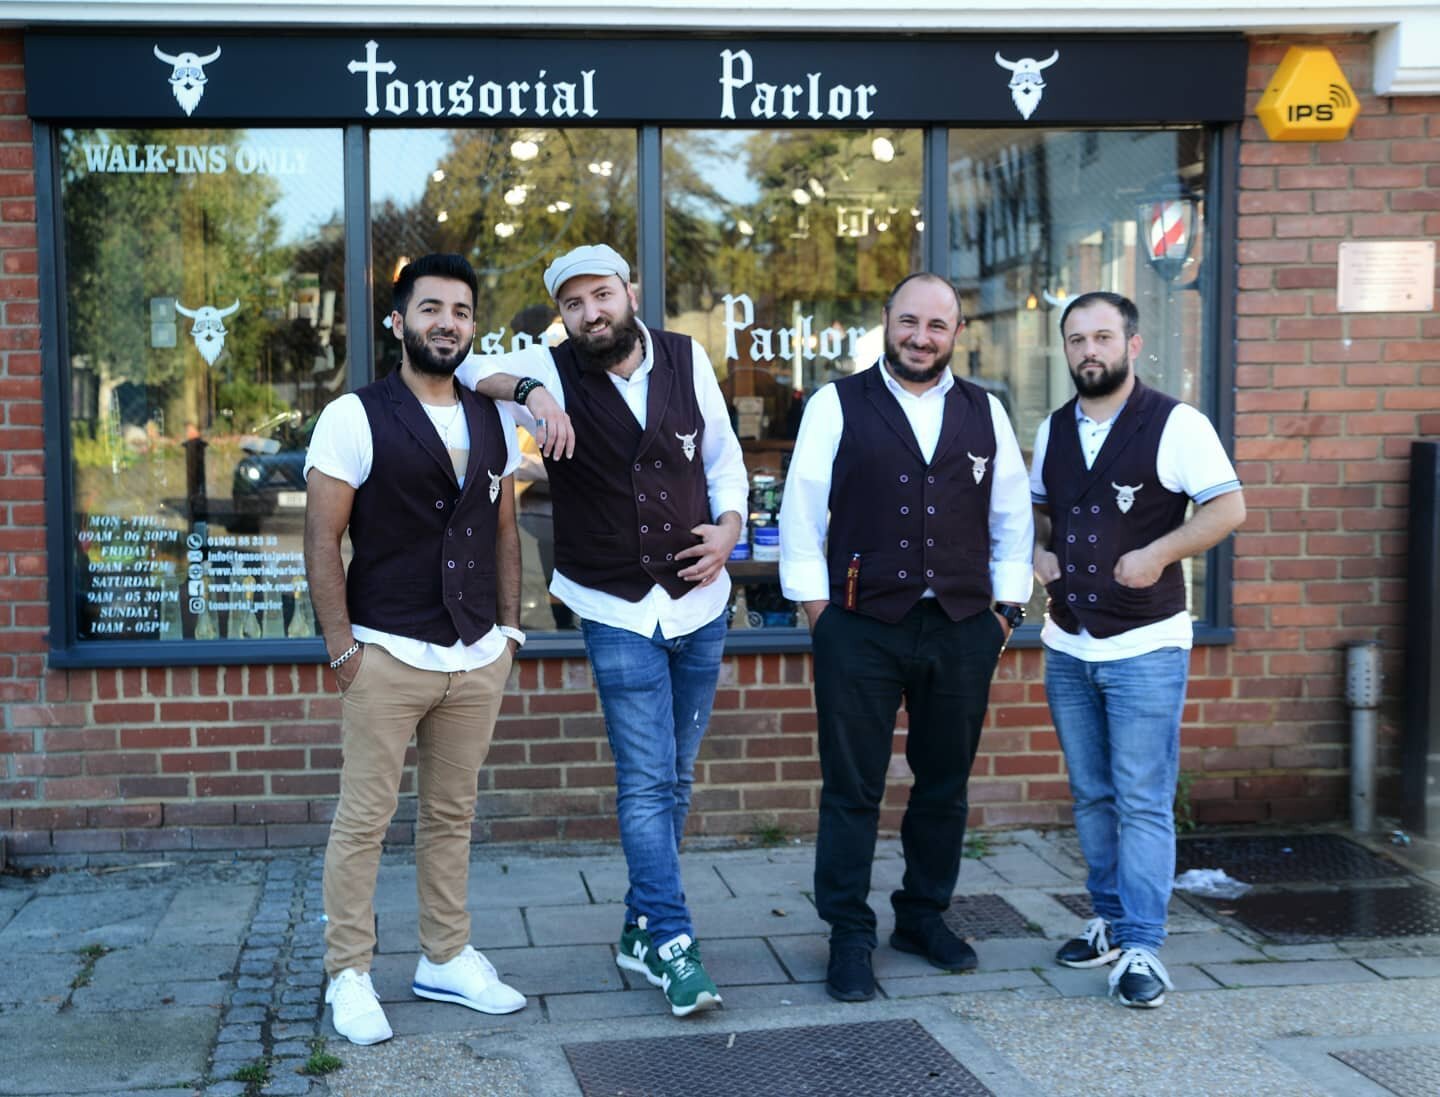 Good morning Folks ‼️
Are you ready for weekend ❓👌
Our amazing team is waiting for you! ✂️
Feel free to walk in 😁😷

#tonsorialparlorarundel #arundel #westsussex #bestbarbershop #hair #male #maletrends #barbering #barberlife #fadegame #luxury #styl